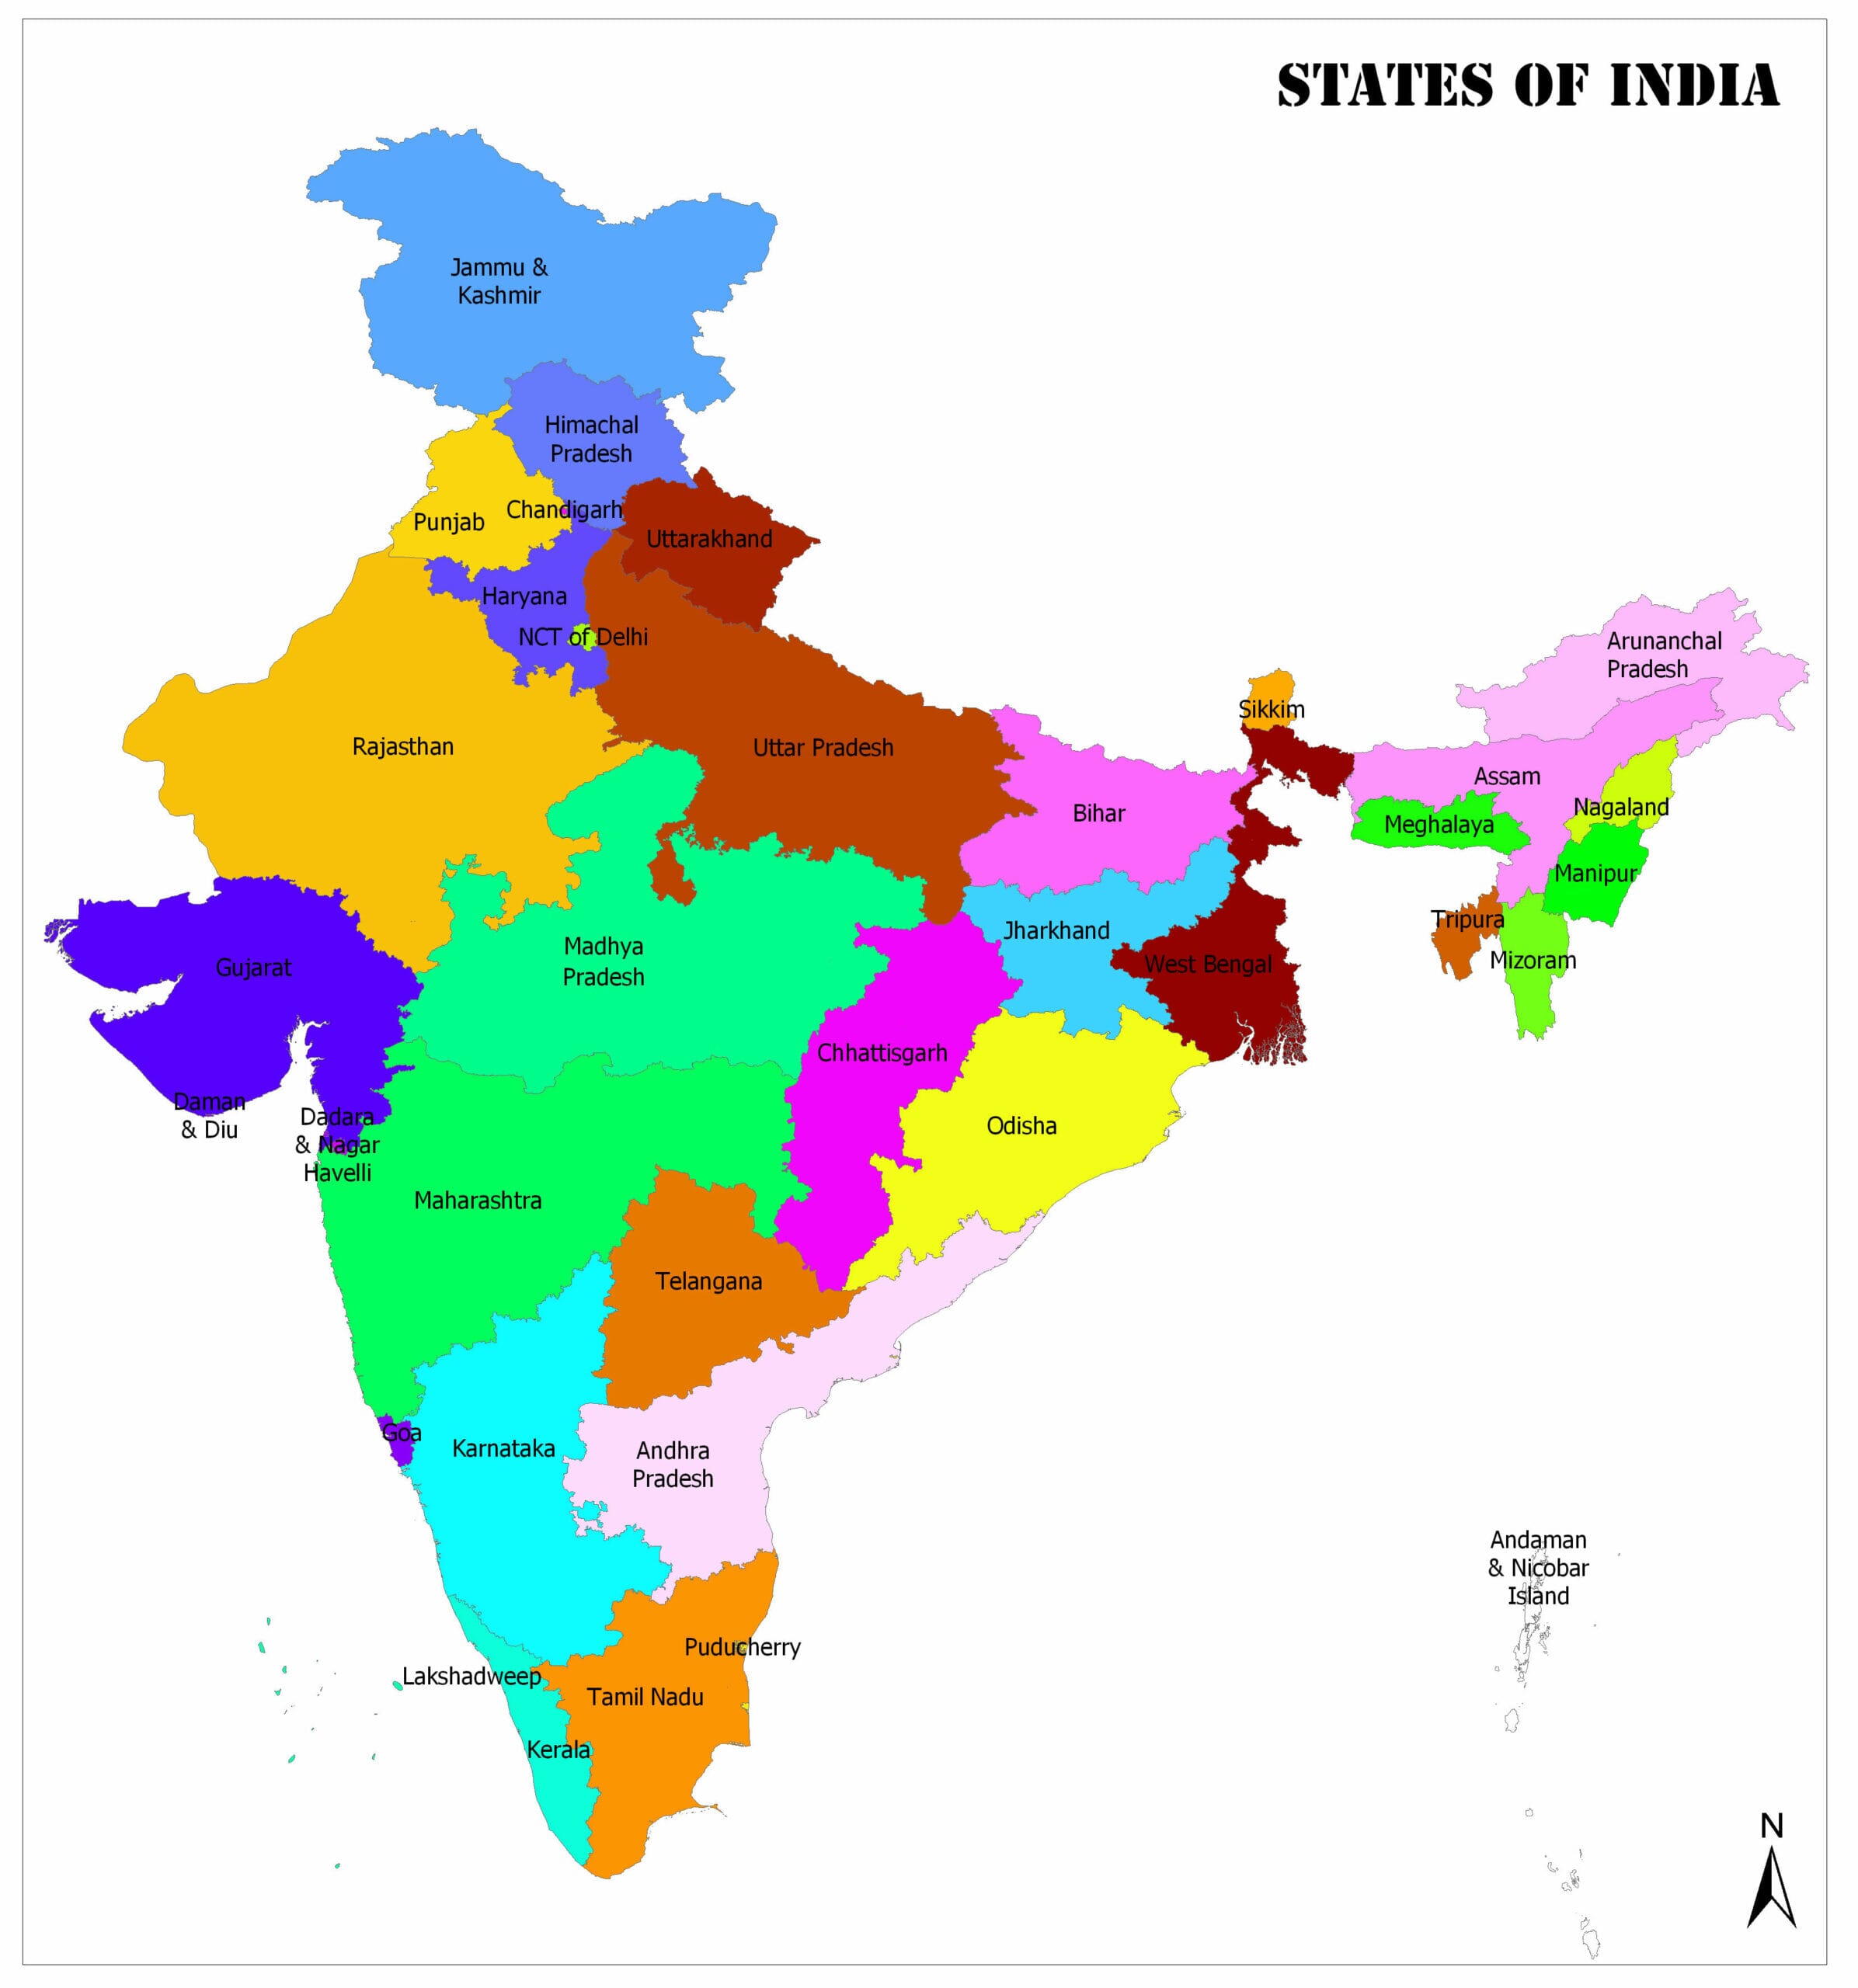 INDIAN STATES - Learn the States of India Easily on Map - YouTube